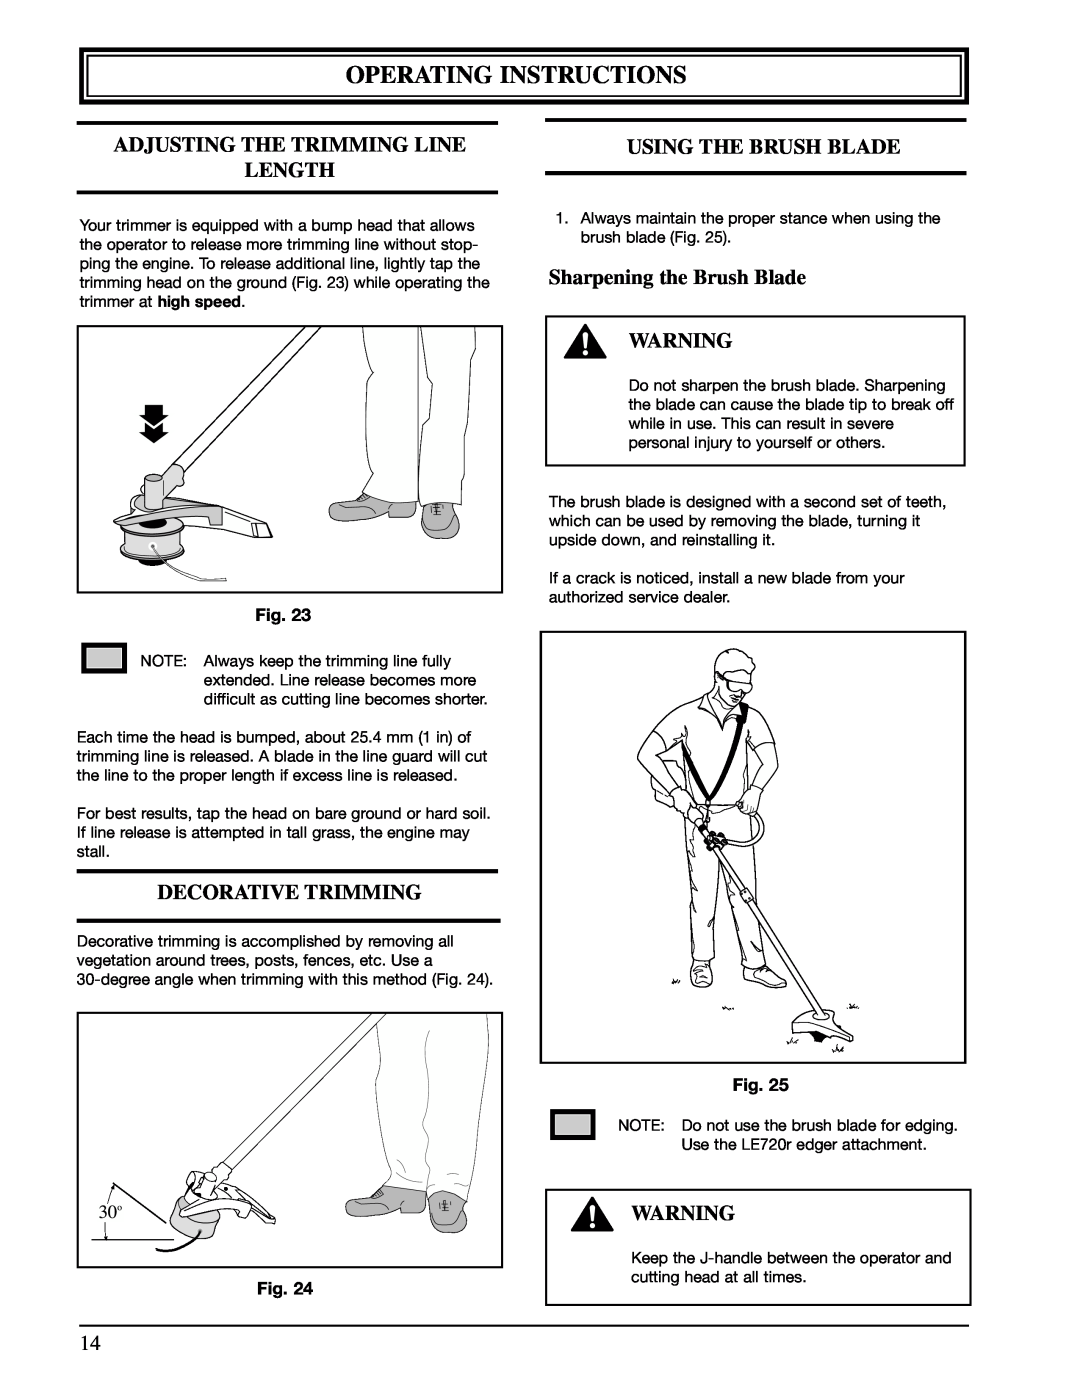 Ryobi 990r manual Operating Instructions, Adjusting The Trimming Line Length, Decorative Trimming, Using The Brush Blade 